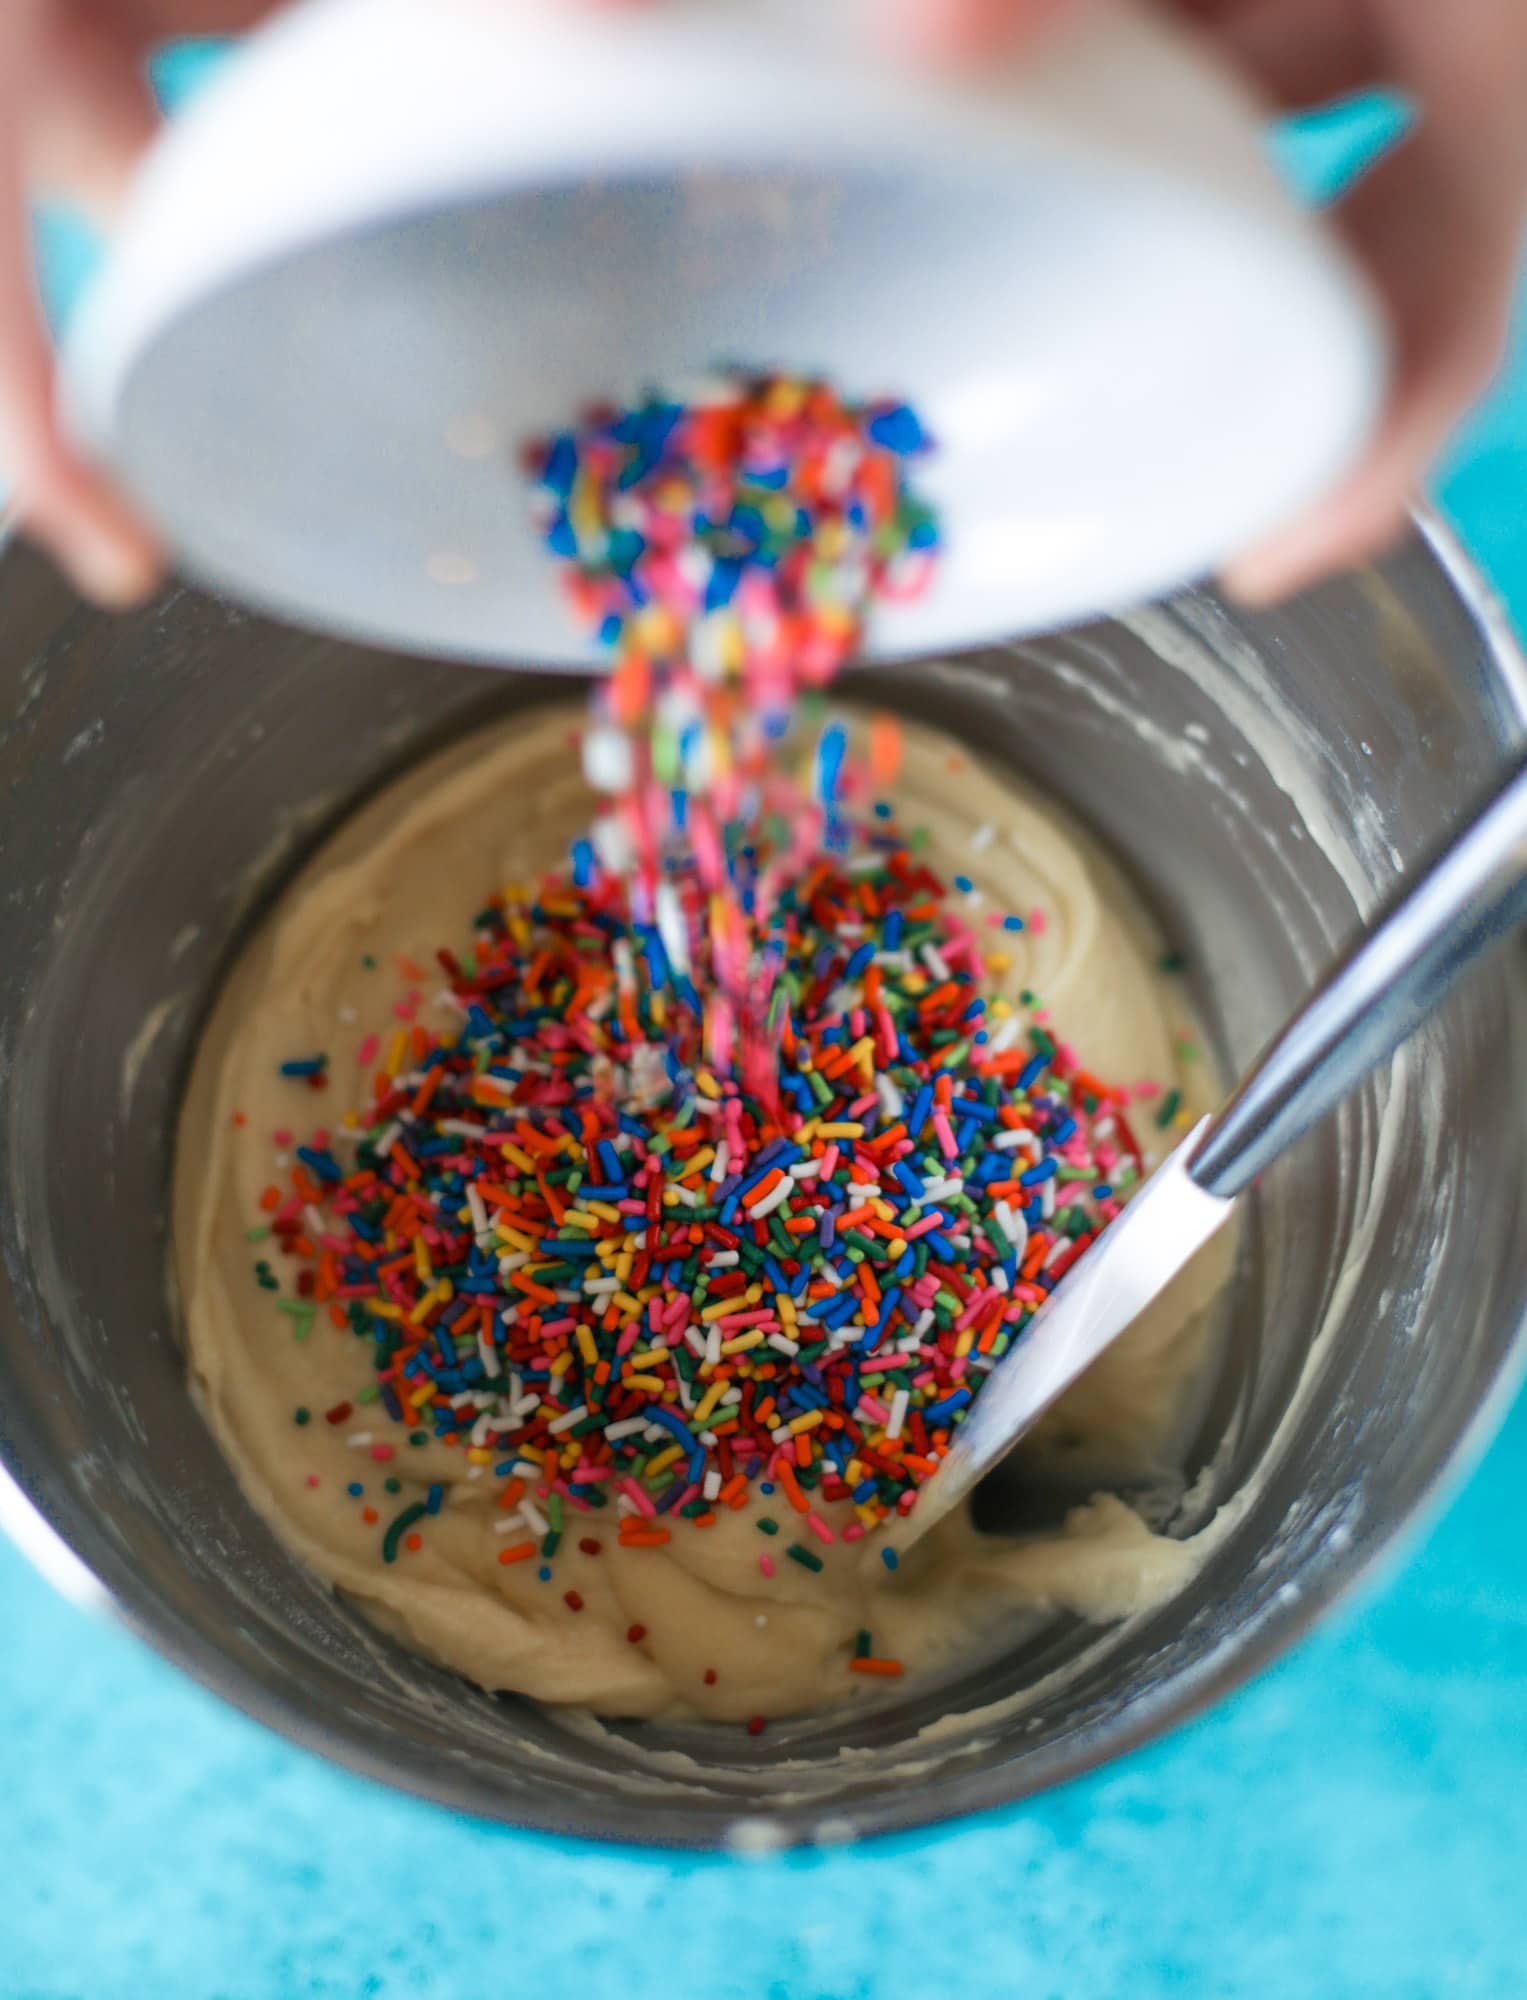 pouring rainbow sprinkles into cake batter